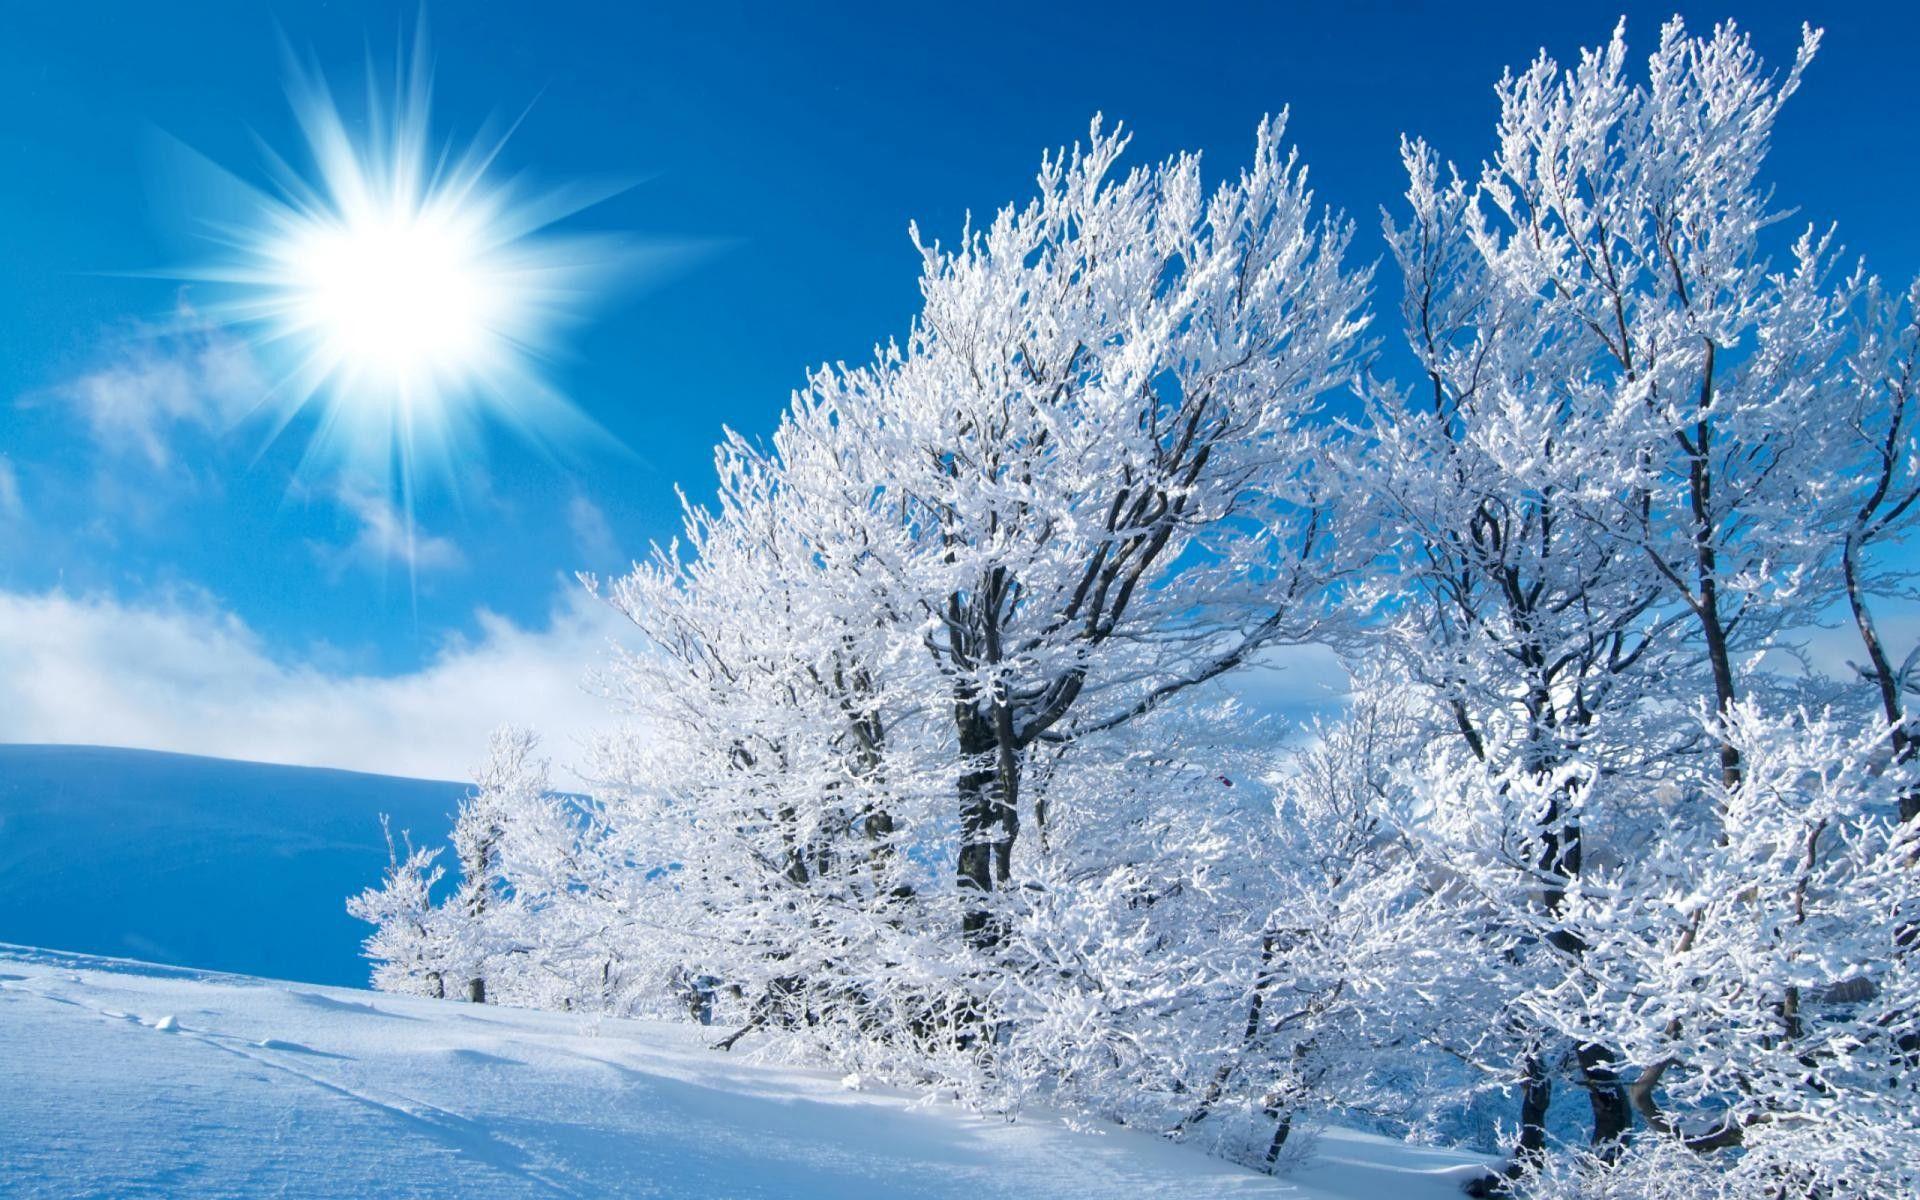 Sunny winter landscape wallpaper and image, picture, photo